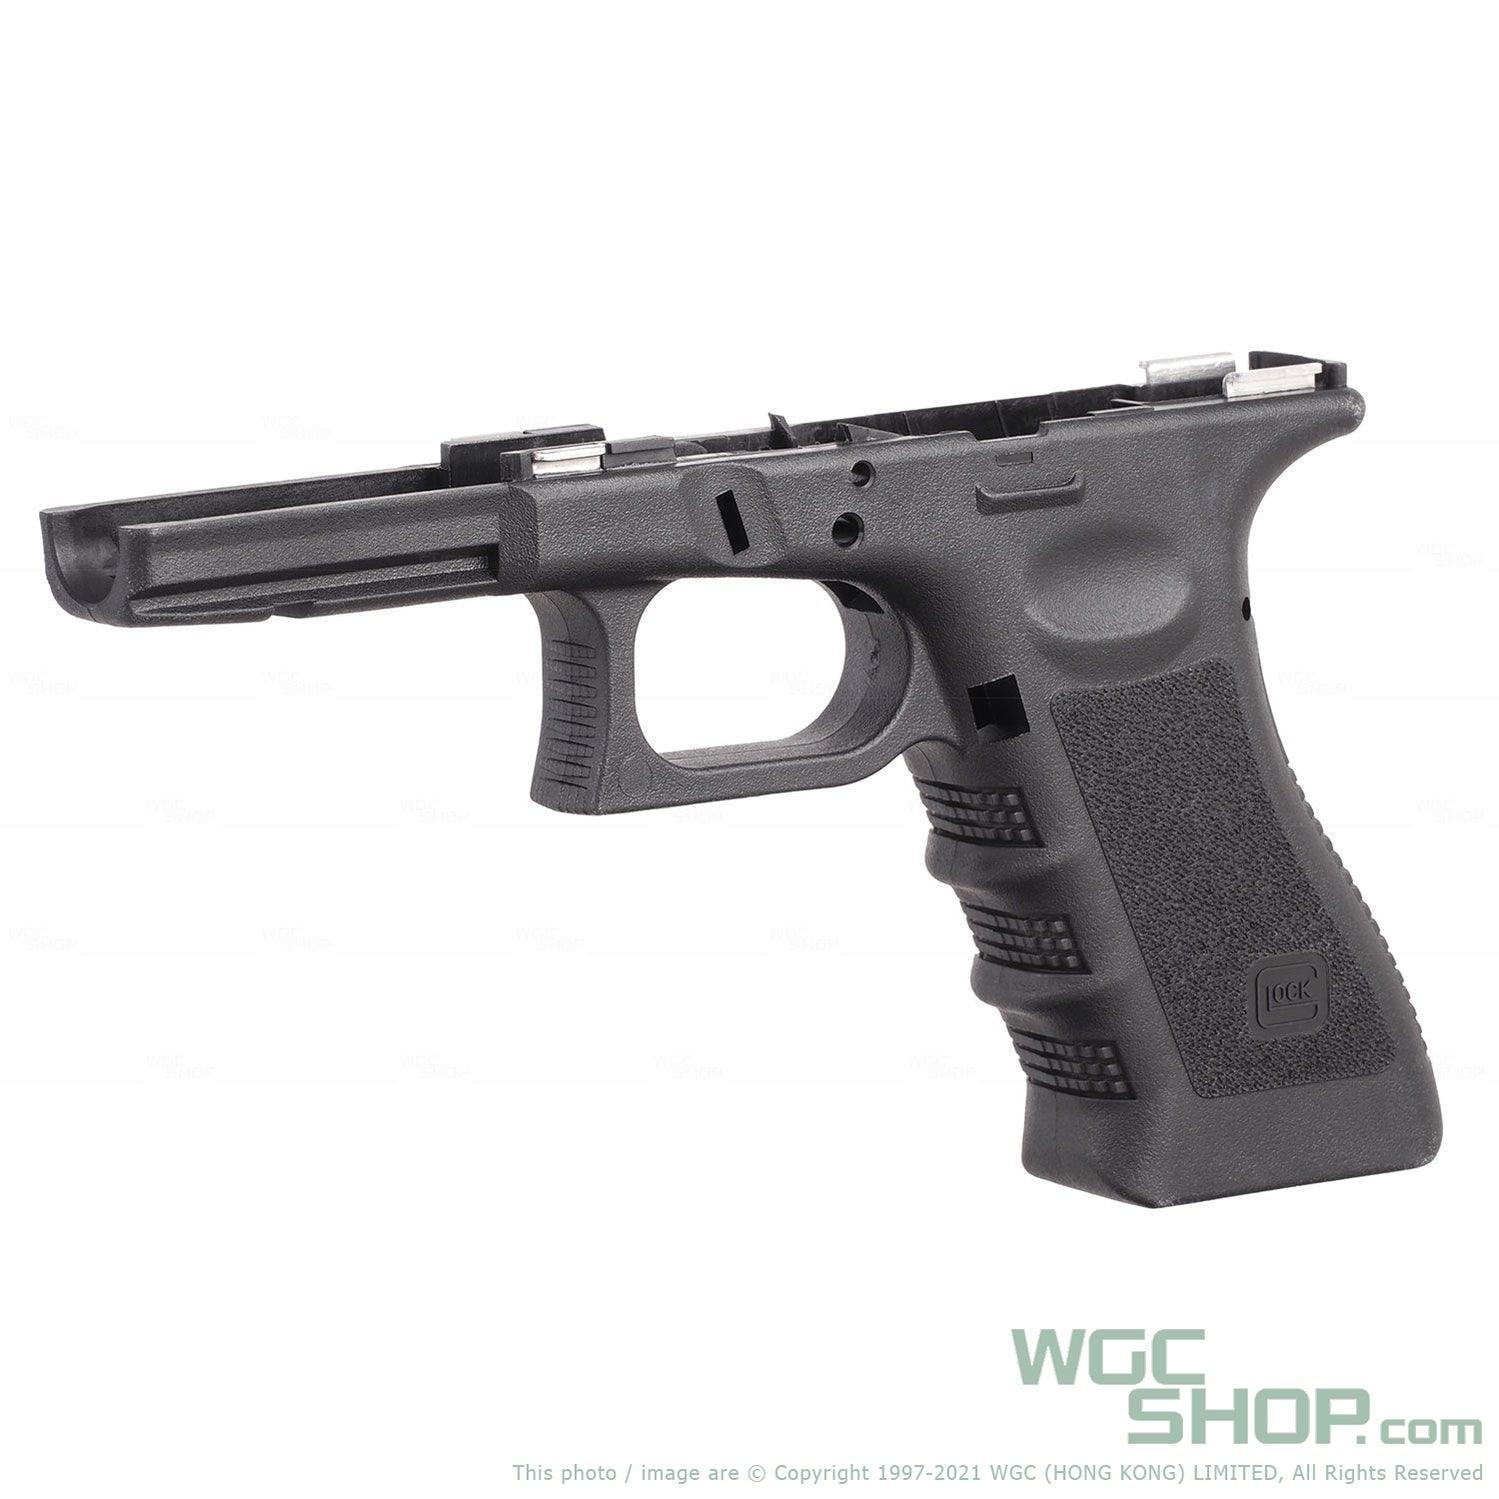 Glock Airsoft Pistols, parts and accessories